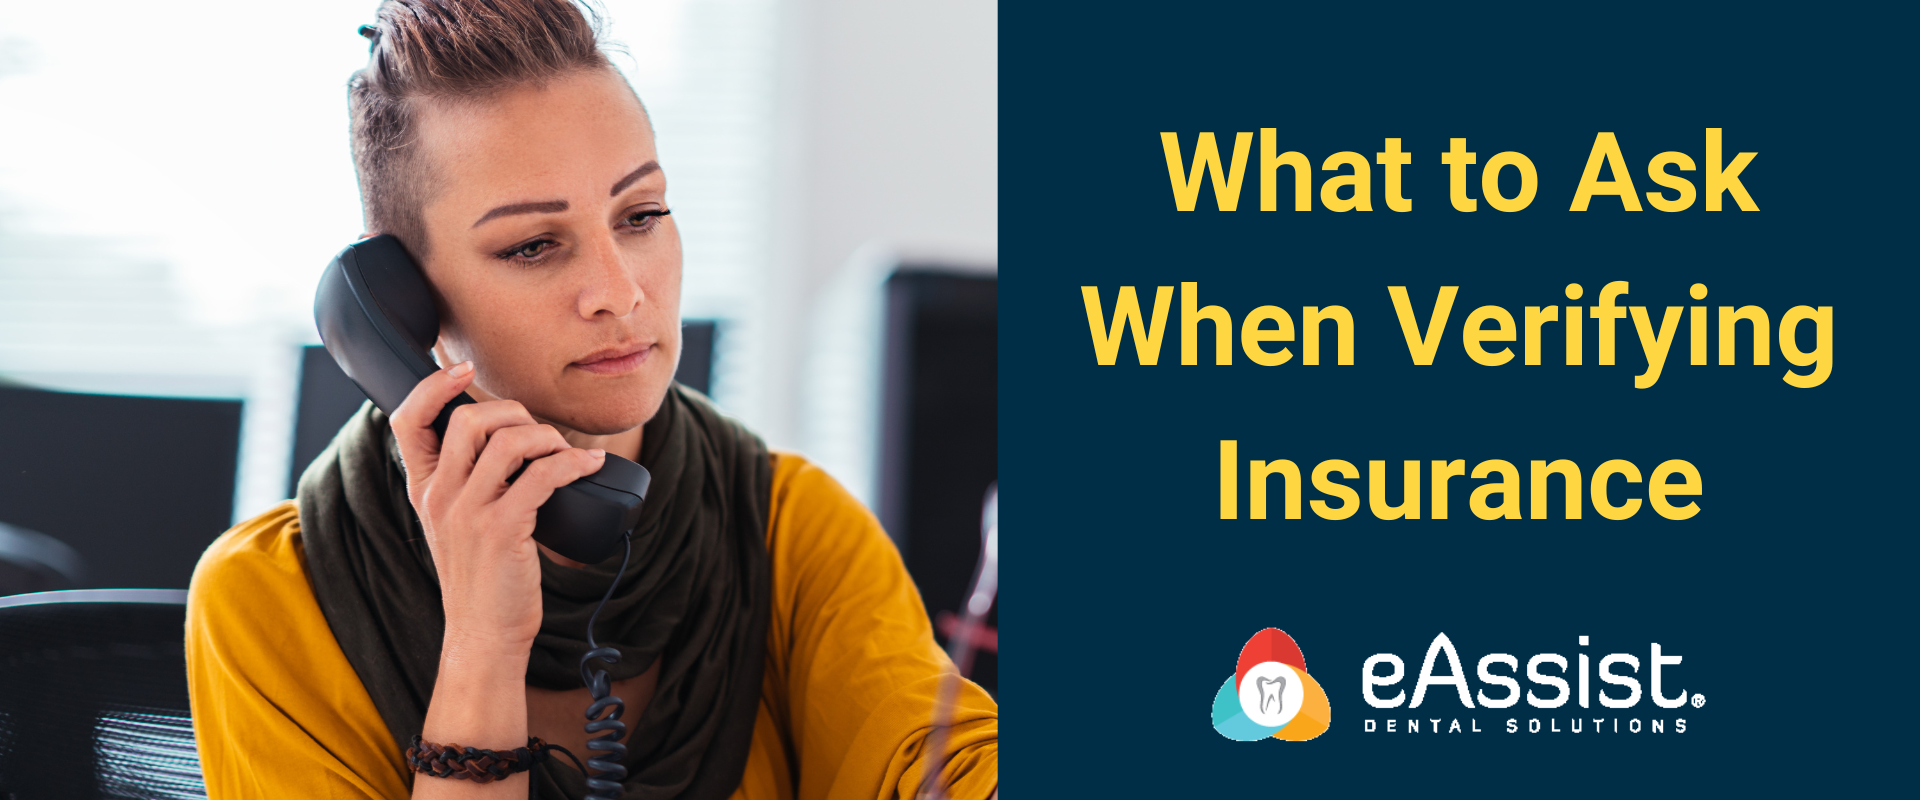 What to ask when verifying insurance